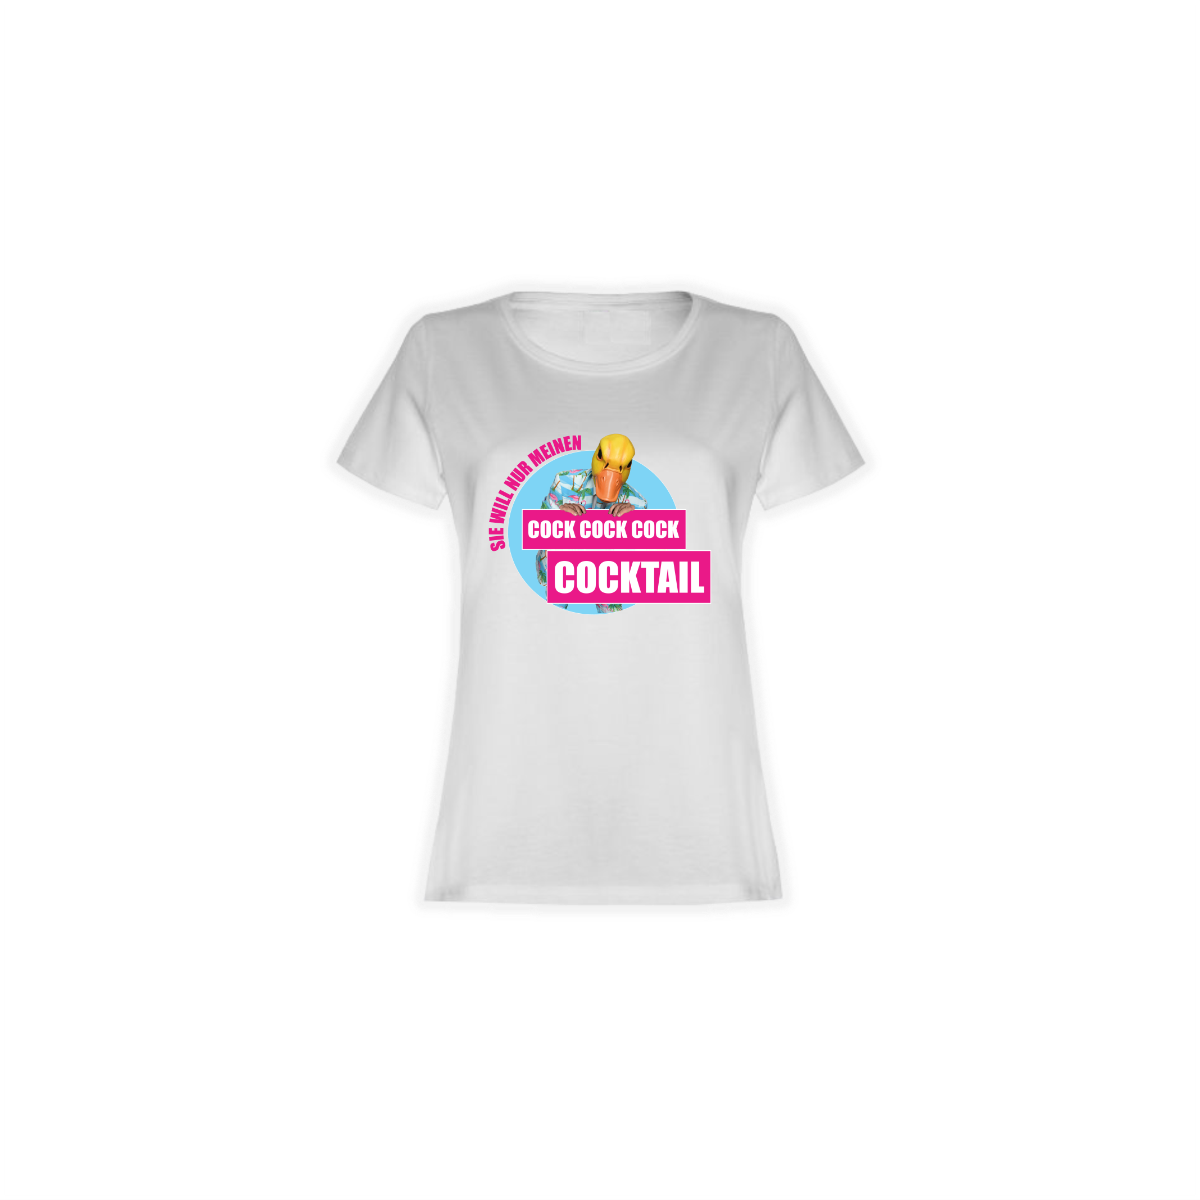 Girly-Shirt "COCK COCK COCKTAIL" weiß